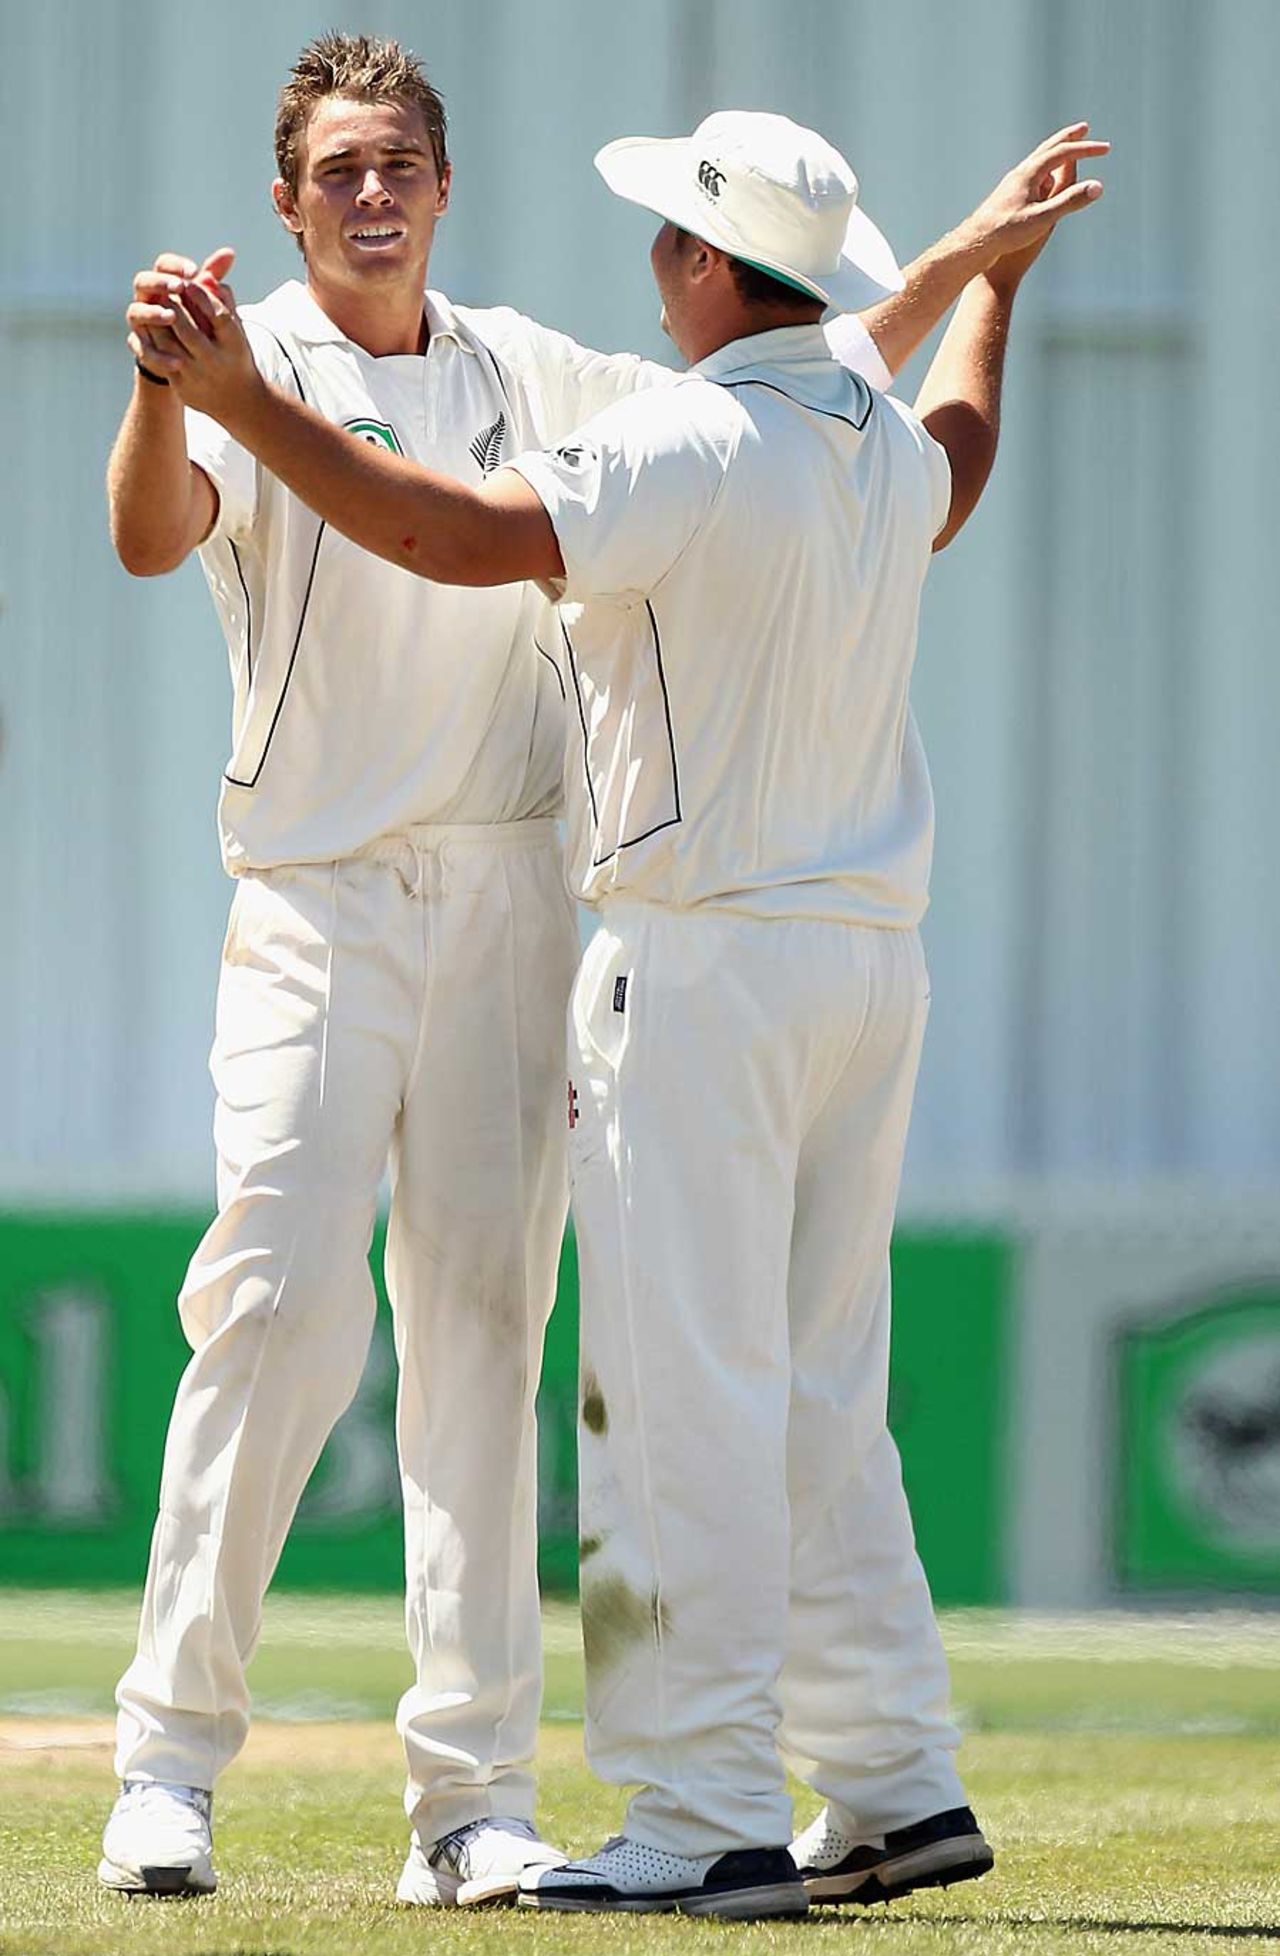 Tim Southee dismissed Asad Shafiq early on the third day, 1st Test, Hamilton, 3rd day, January 9, 2011